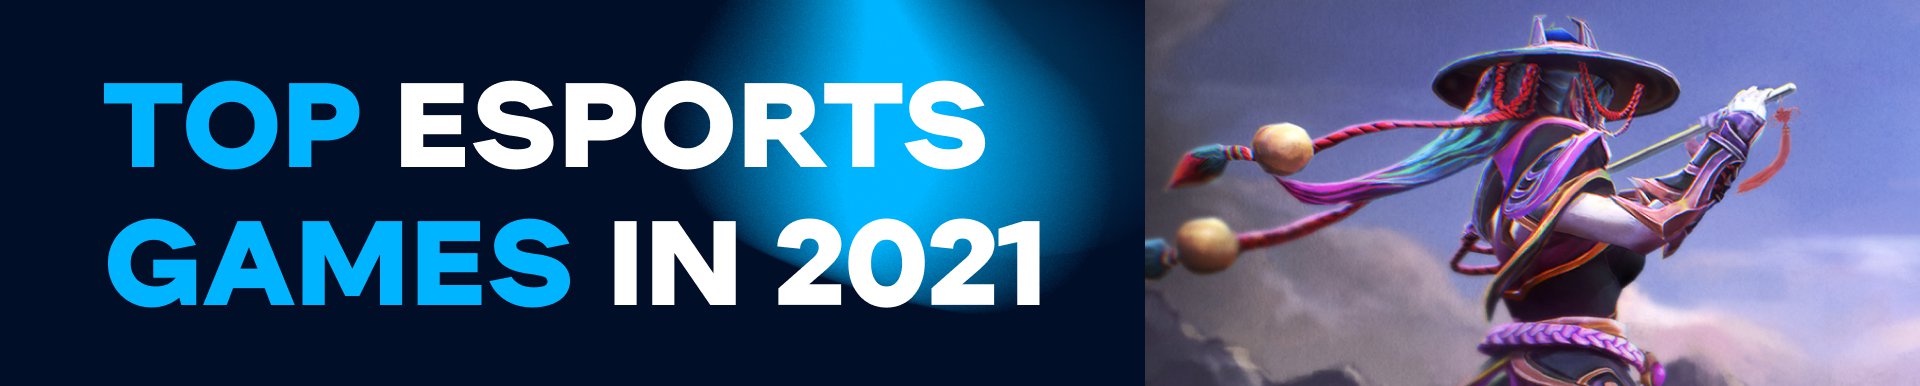 Top esports games in 2021. Image: WePlay Holding